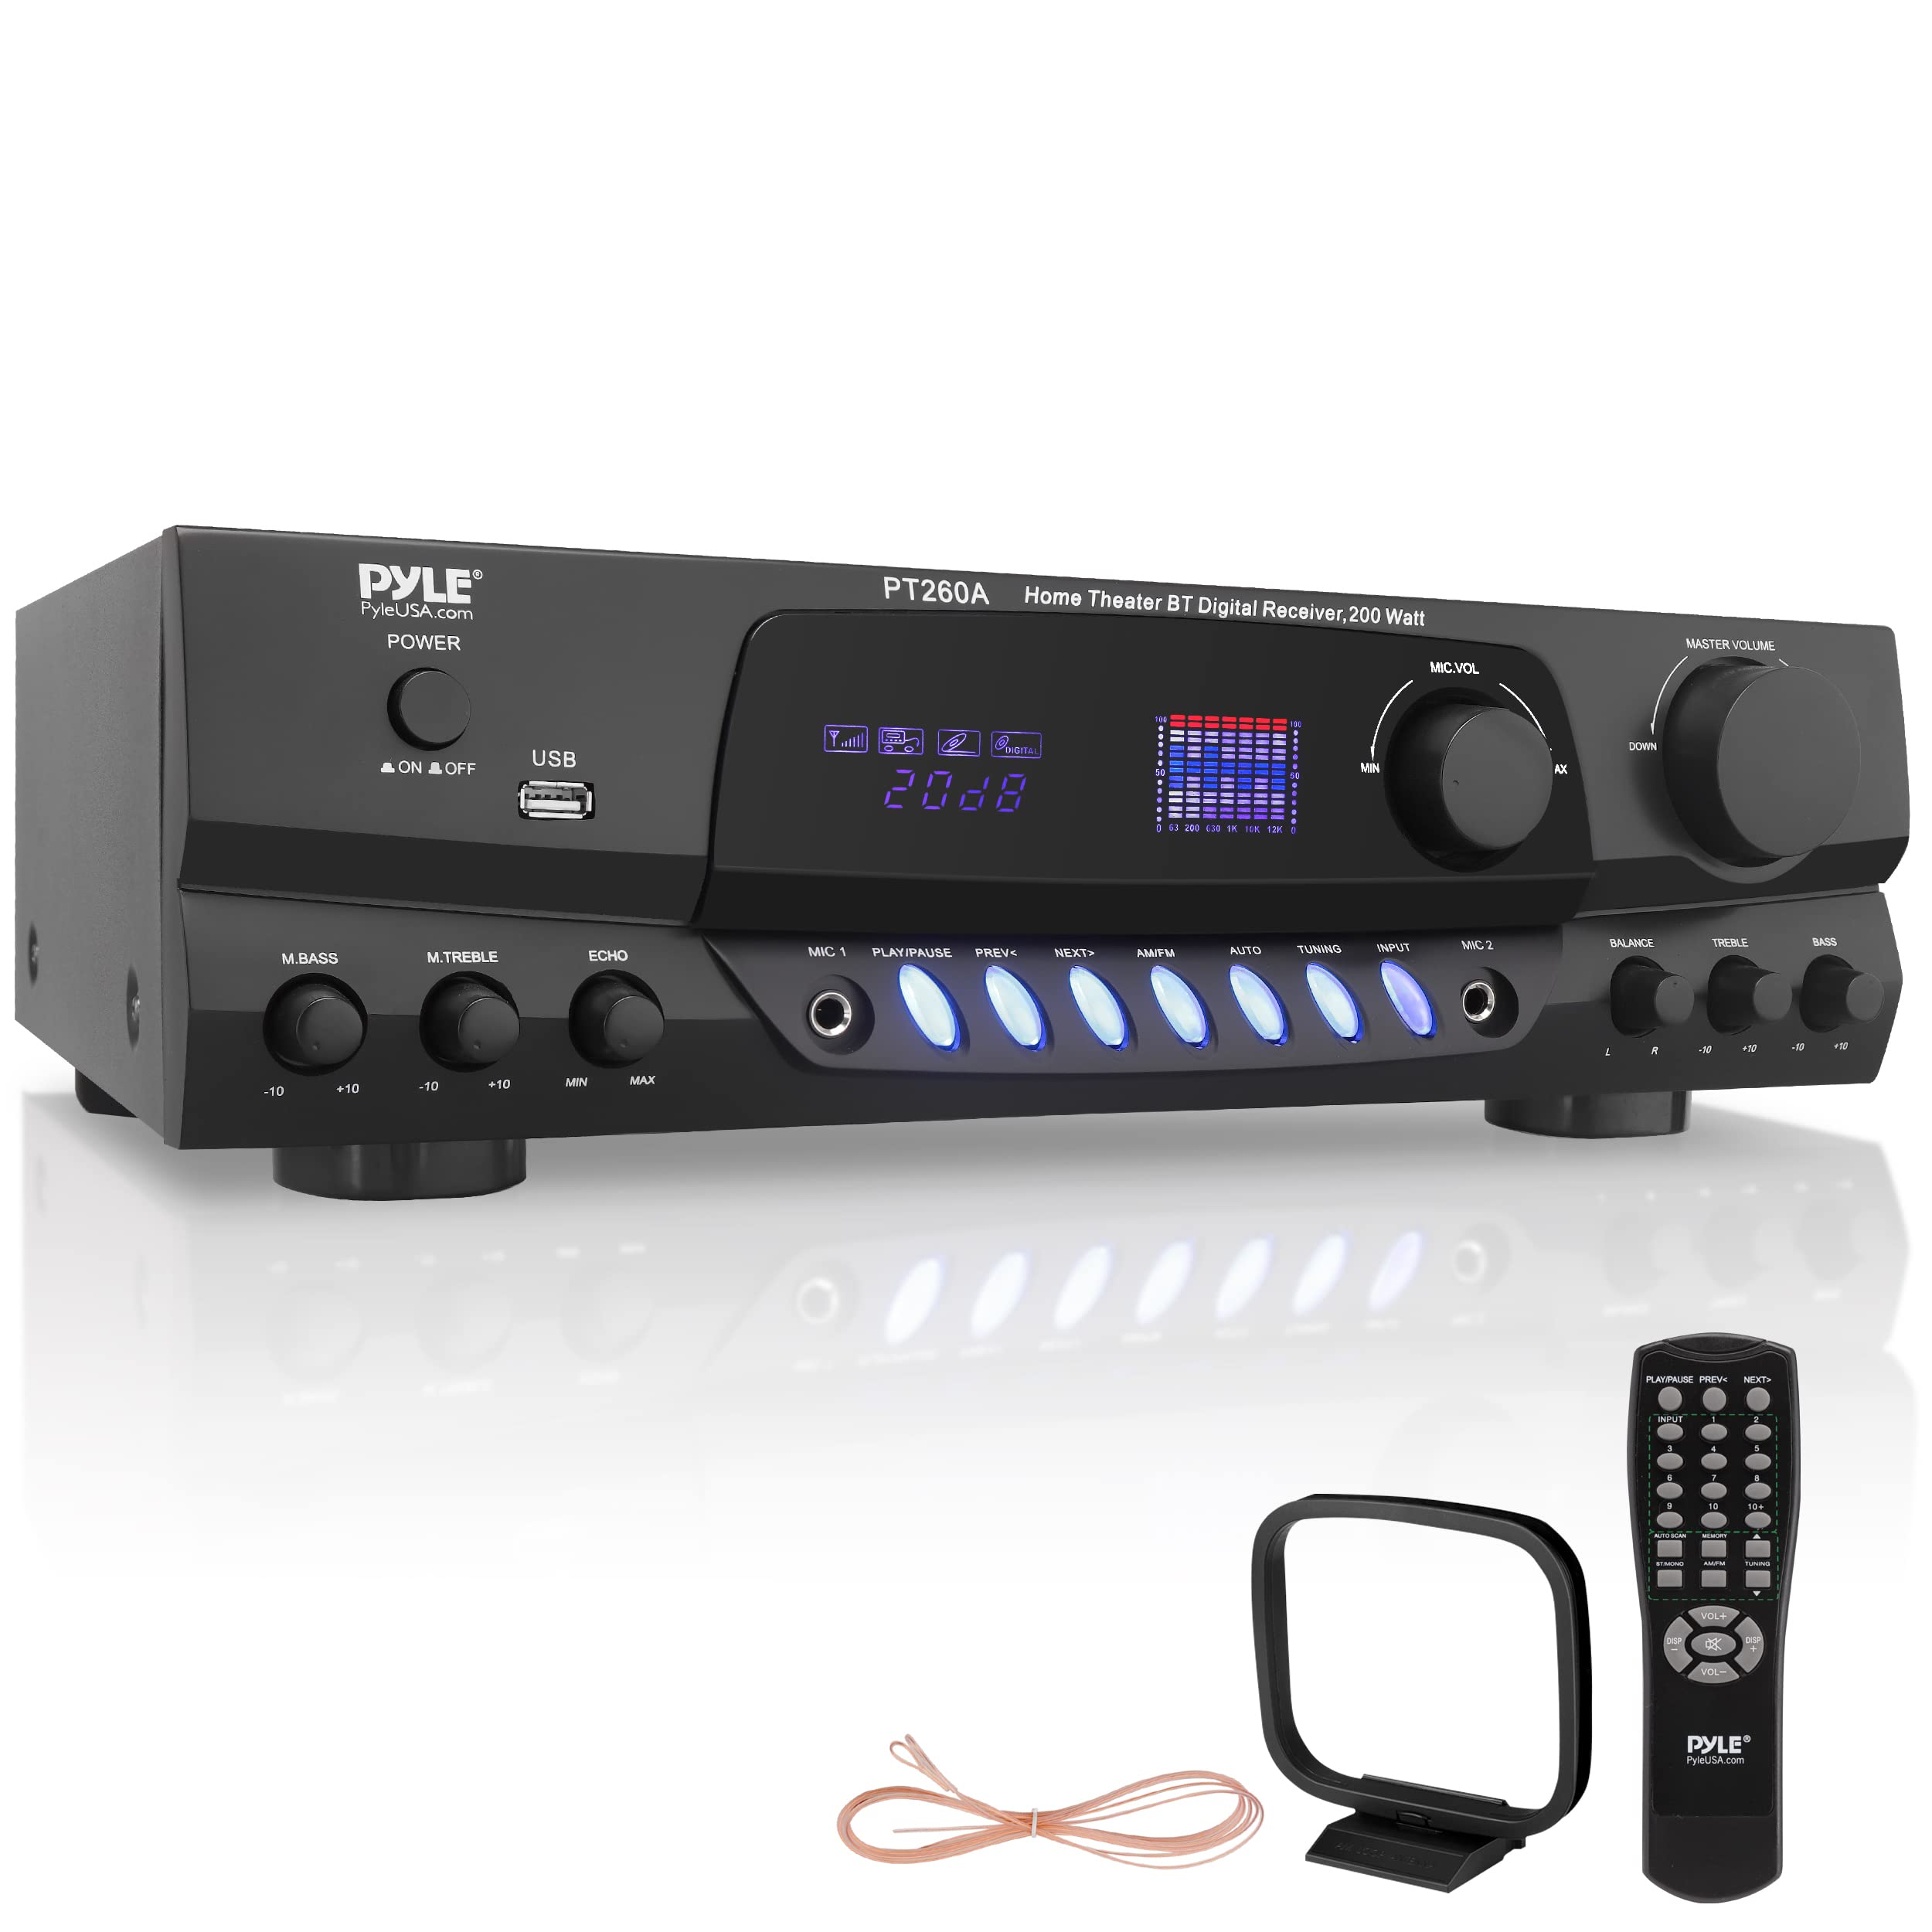 Pyle 200W Home Audio Power Amplifier - Stereo Receiver w/AM FM Tuner, 2 Microphone Input w/Echo for Karaoke, Great Addition to Your Home Entertainment Speaker System - PT260A, Black, 17 inches